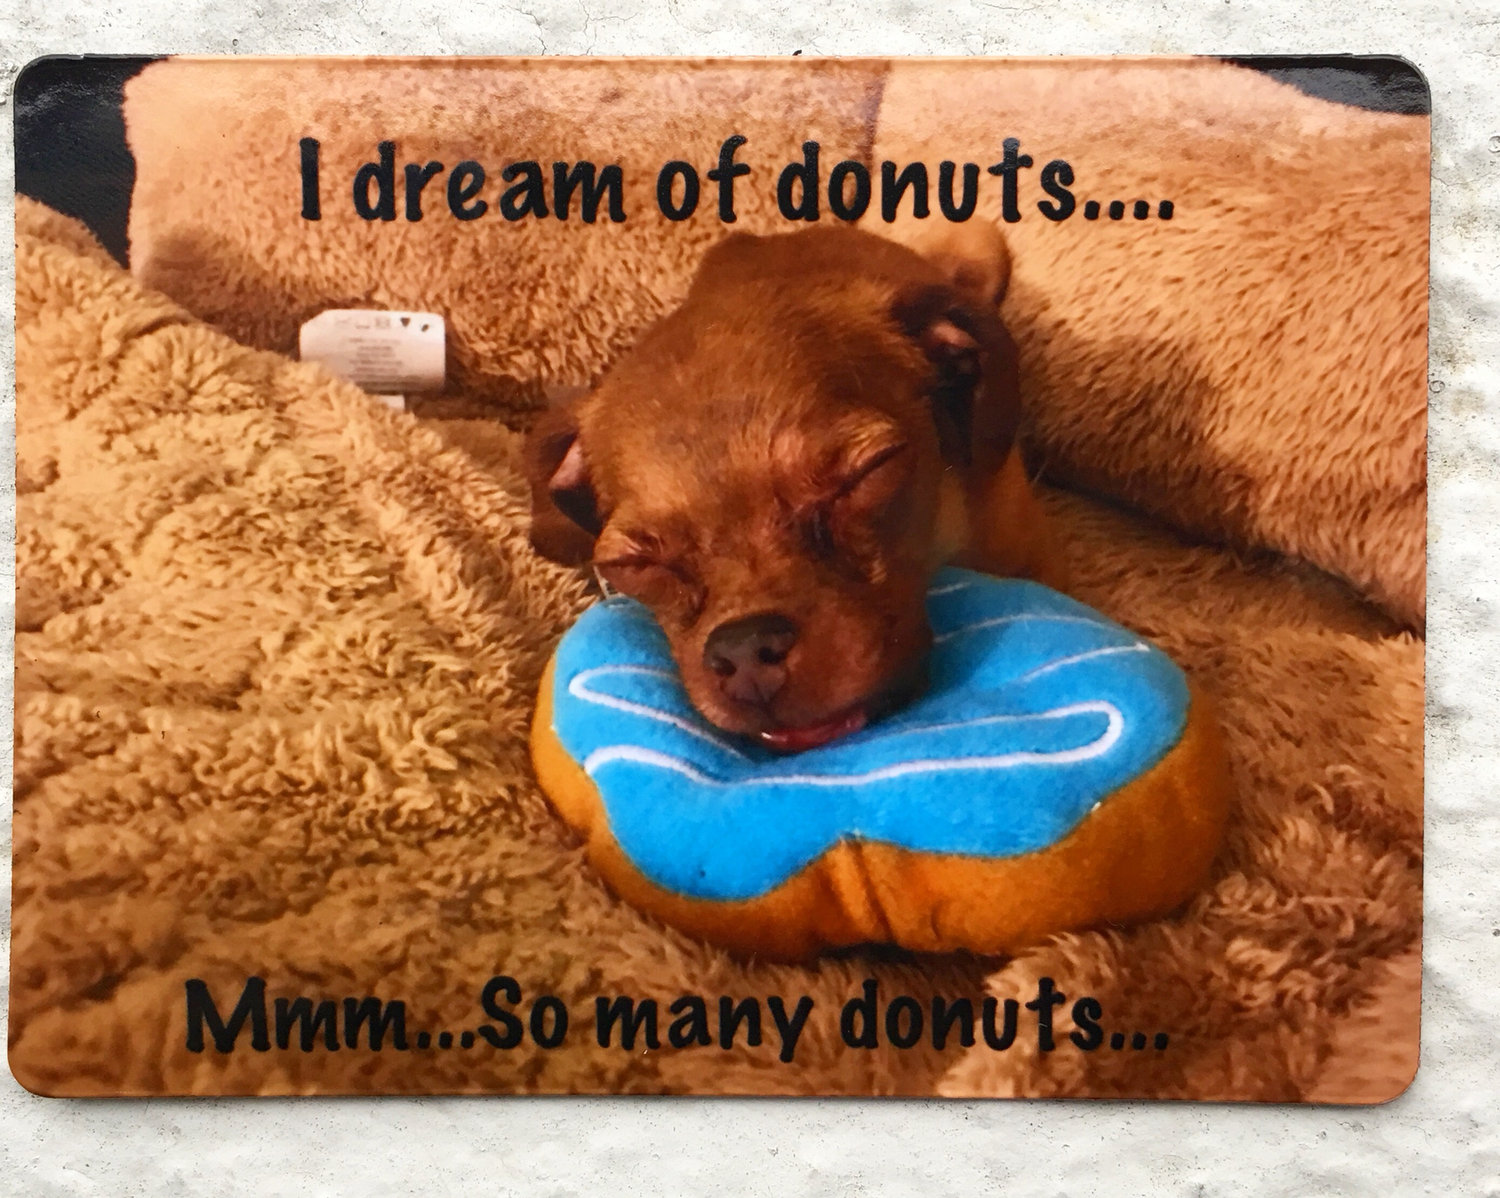 I dream of donuts